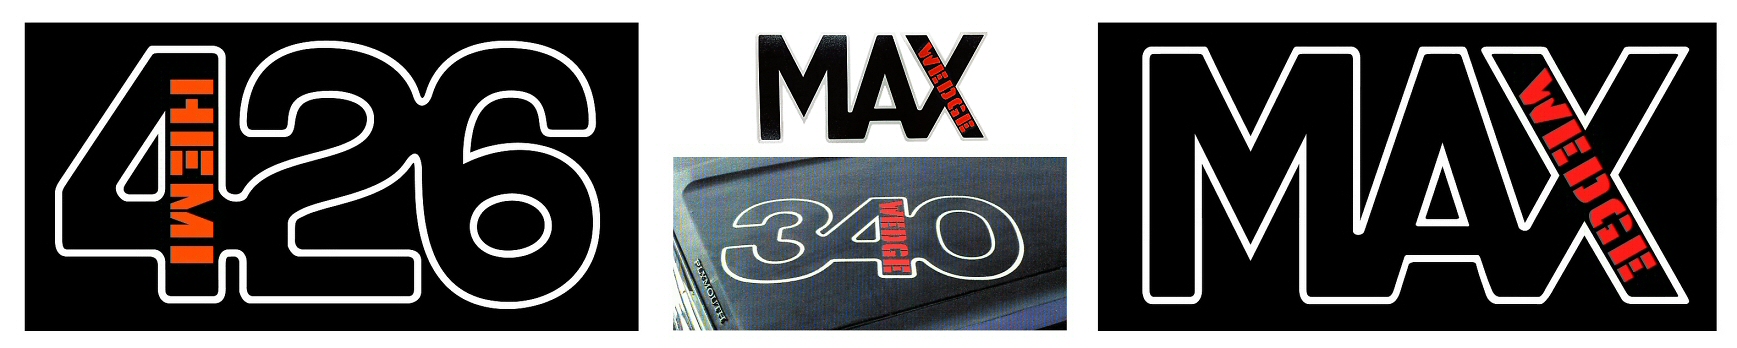 "Max Wedge" and "426 Hemi"Hood Pinstripe Lettering Decals